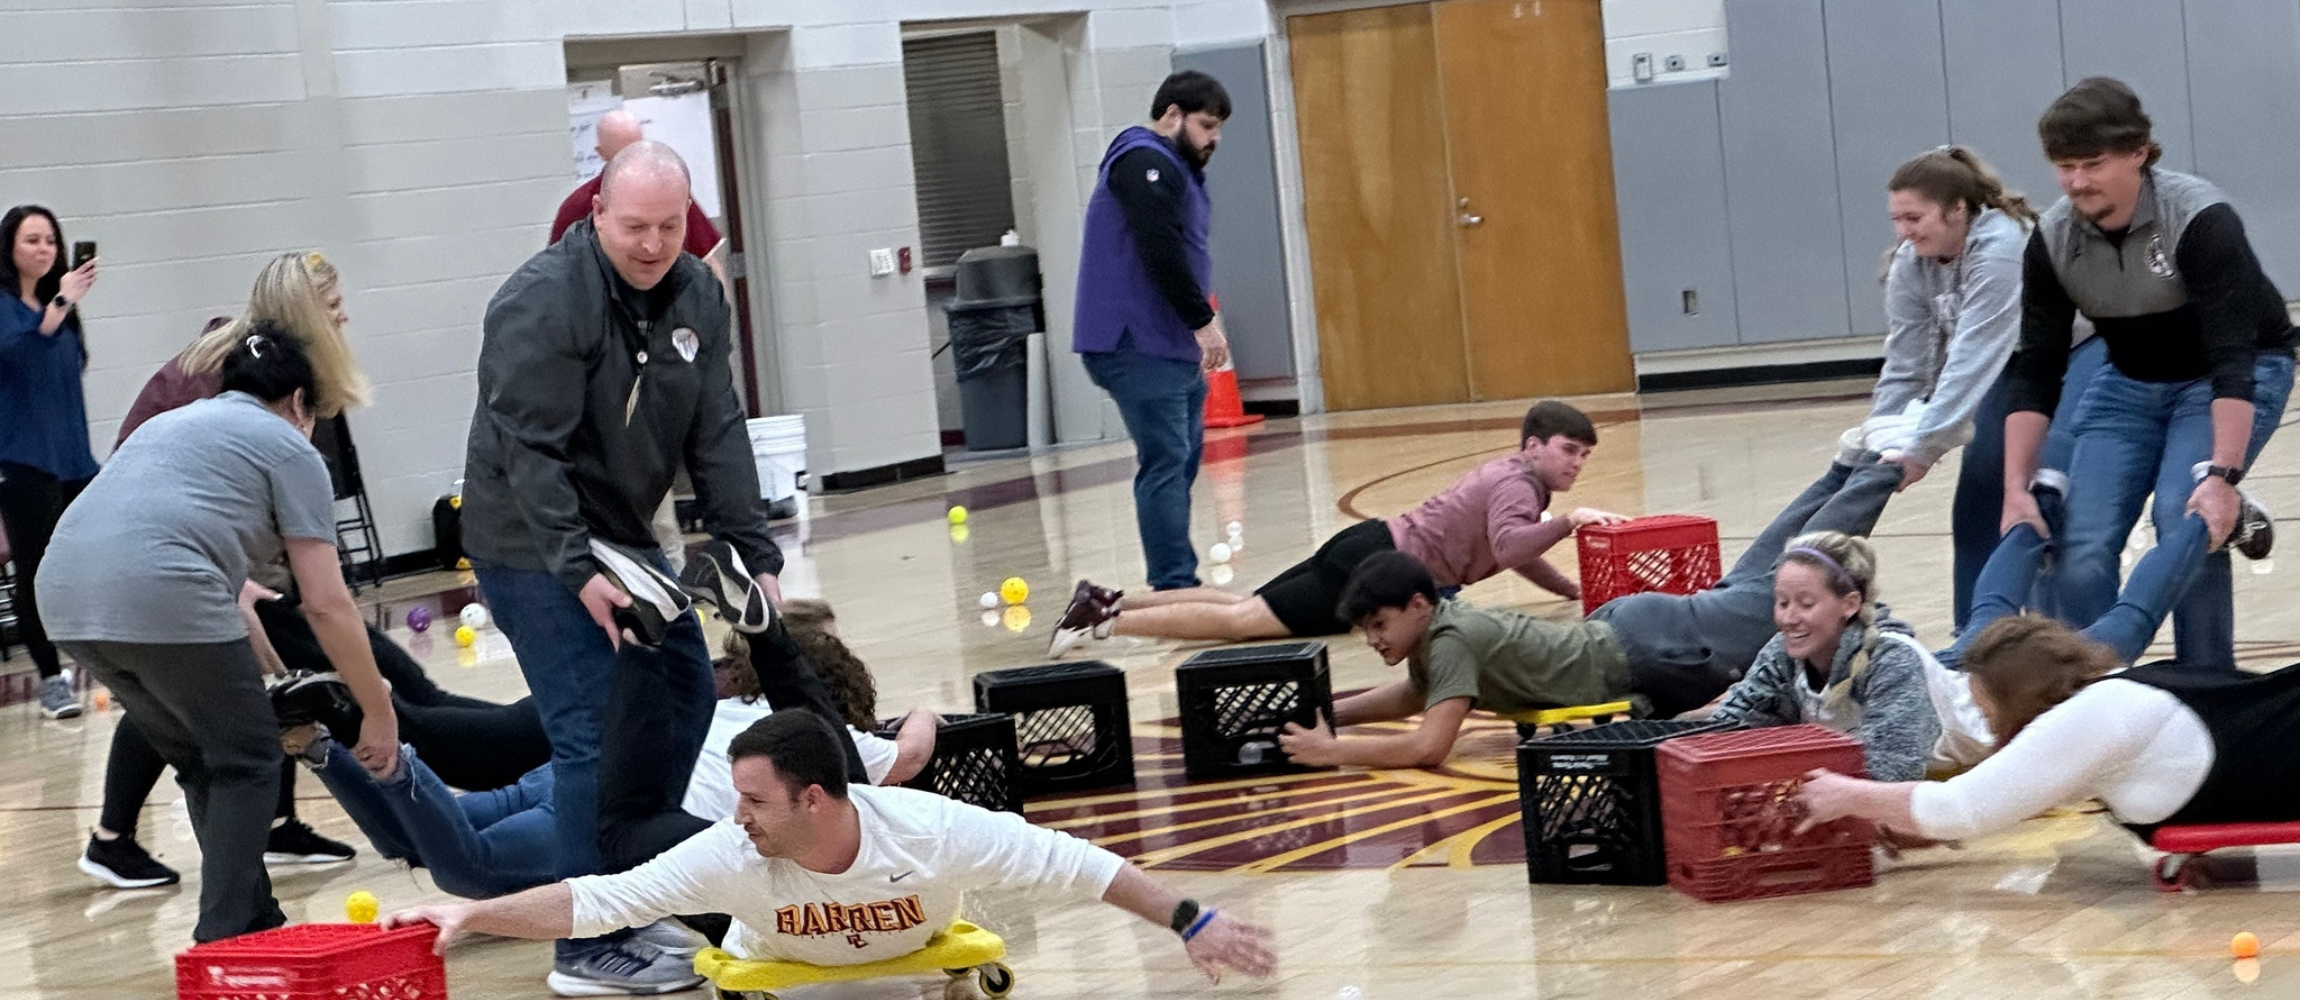 Students and teachers playing in gym